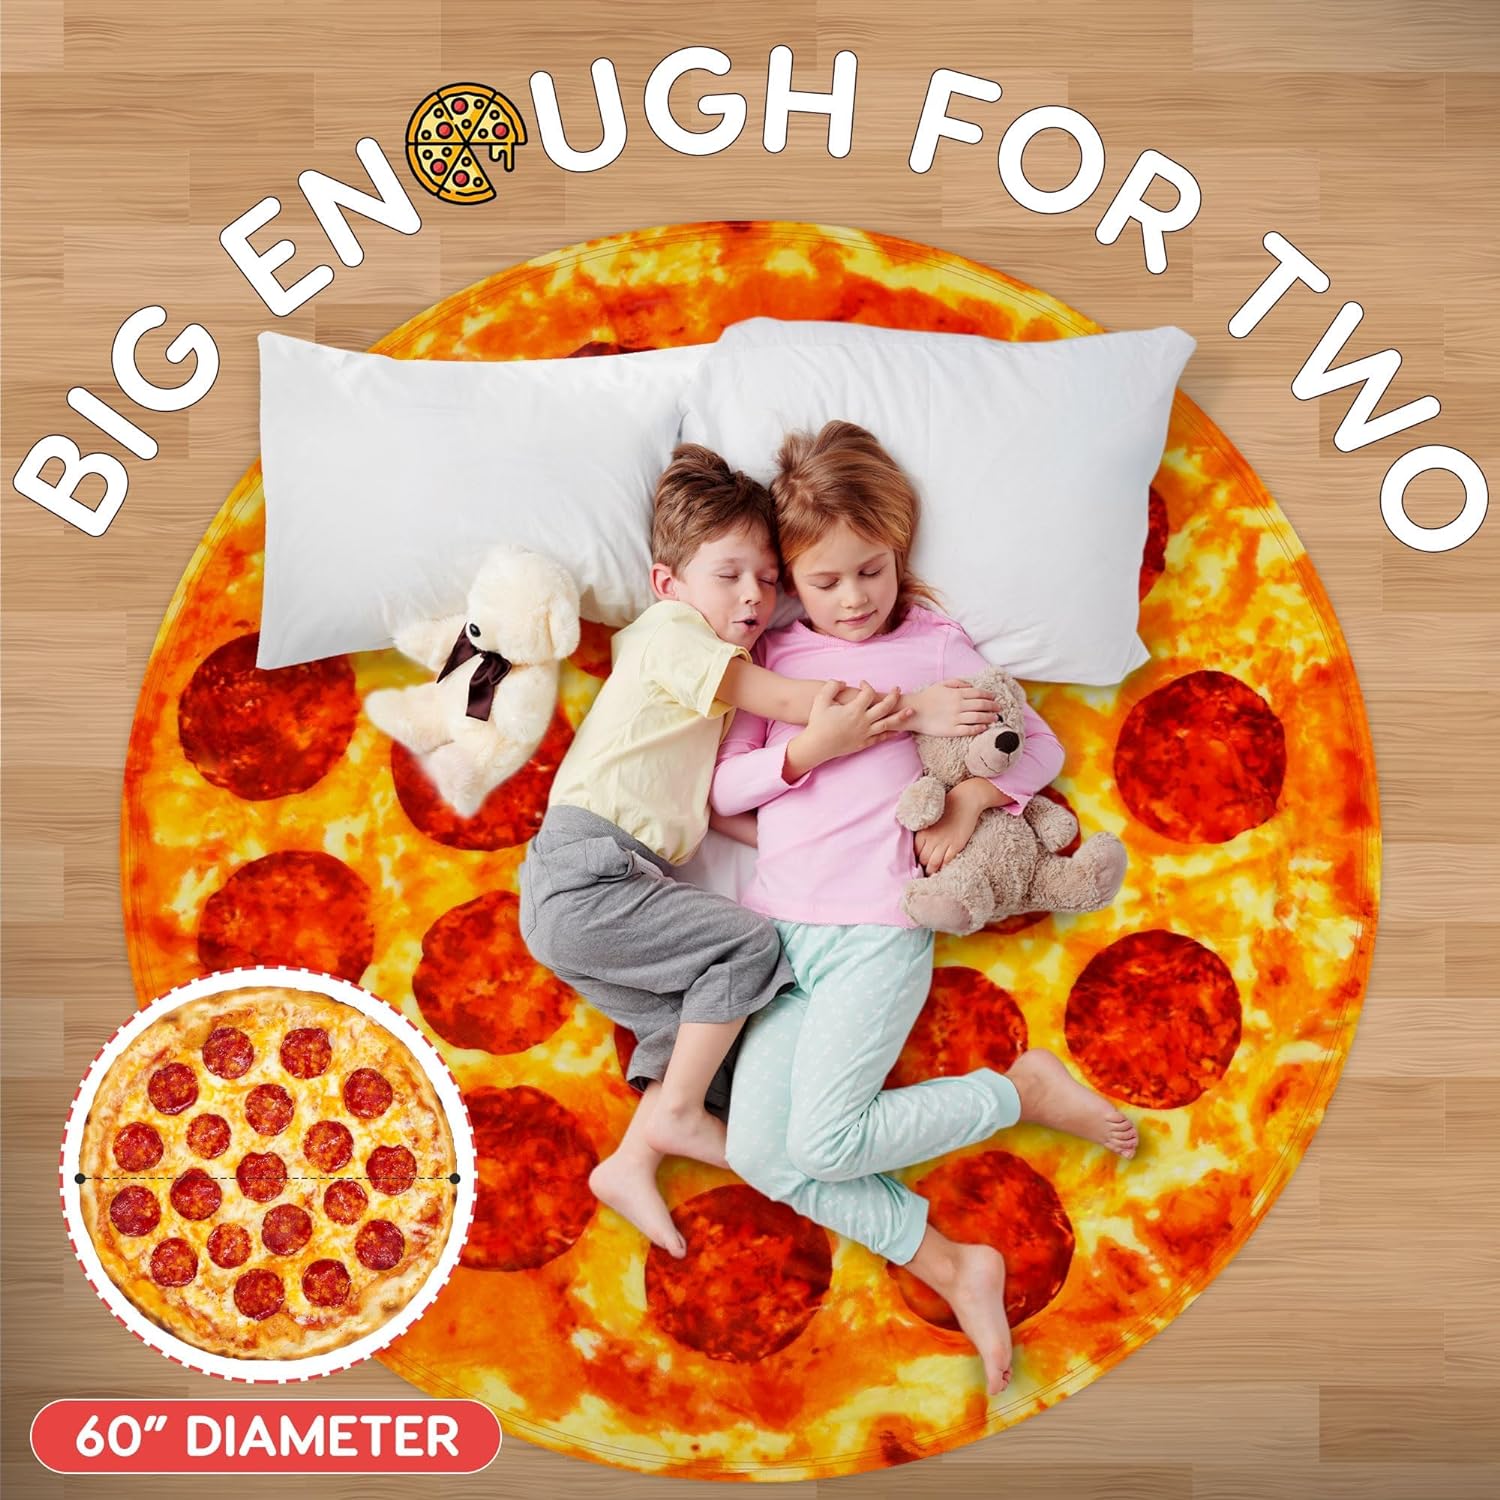 Zulay Kitchen Double Sided Novelty Blanket - 60 inch Pepperoni Pizza with Pizza Box Gift Packaging